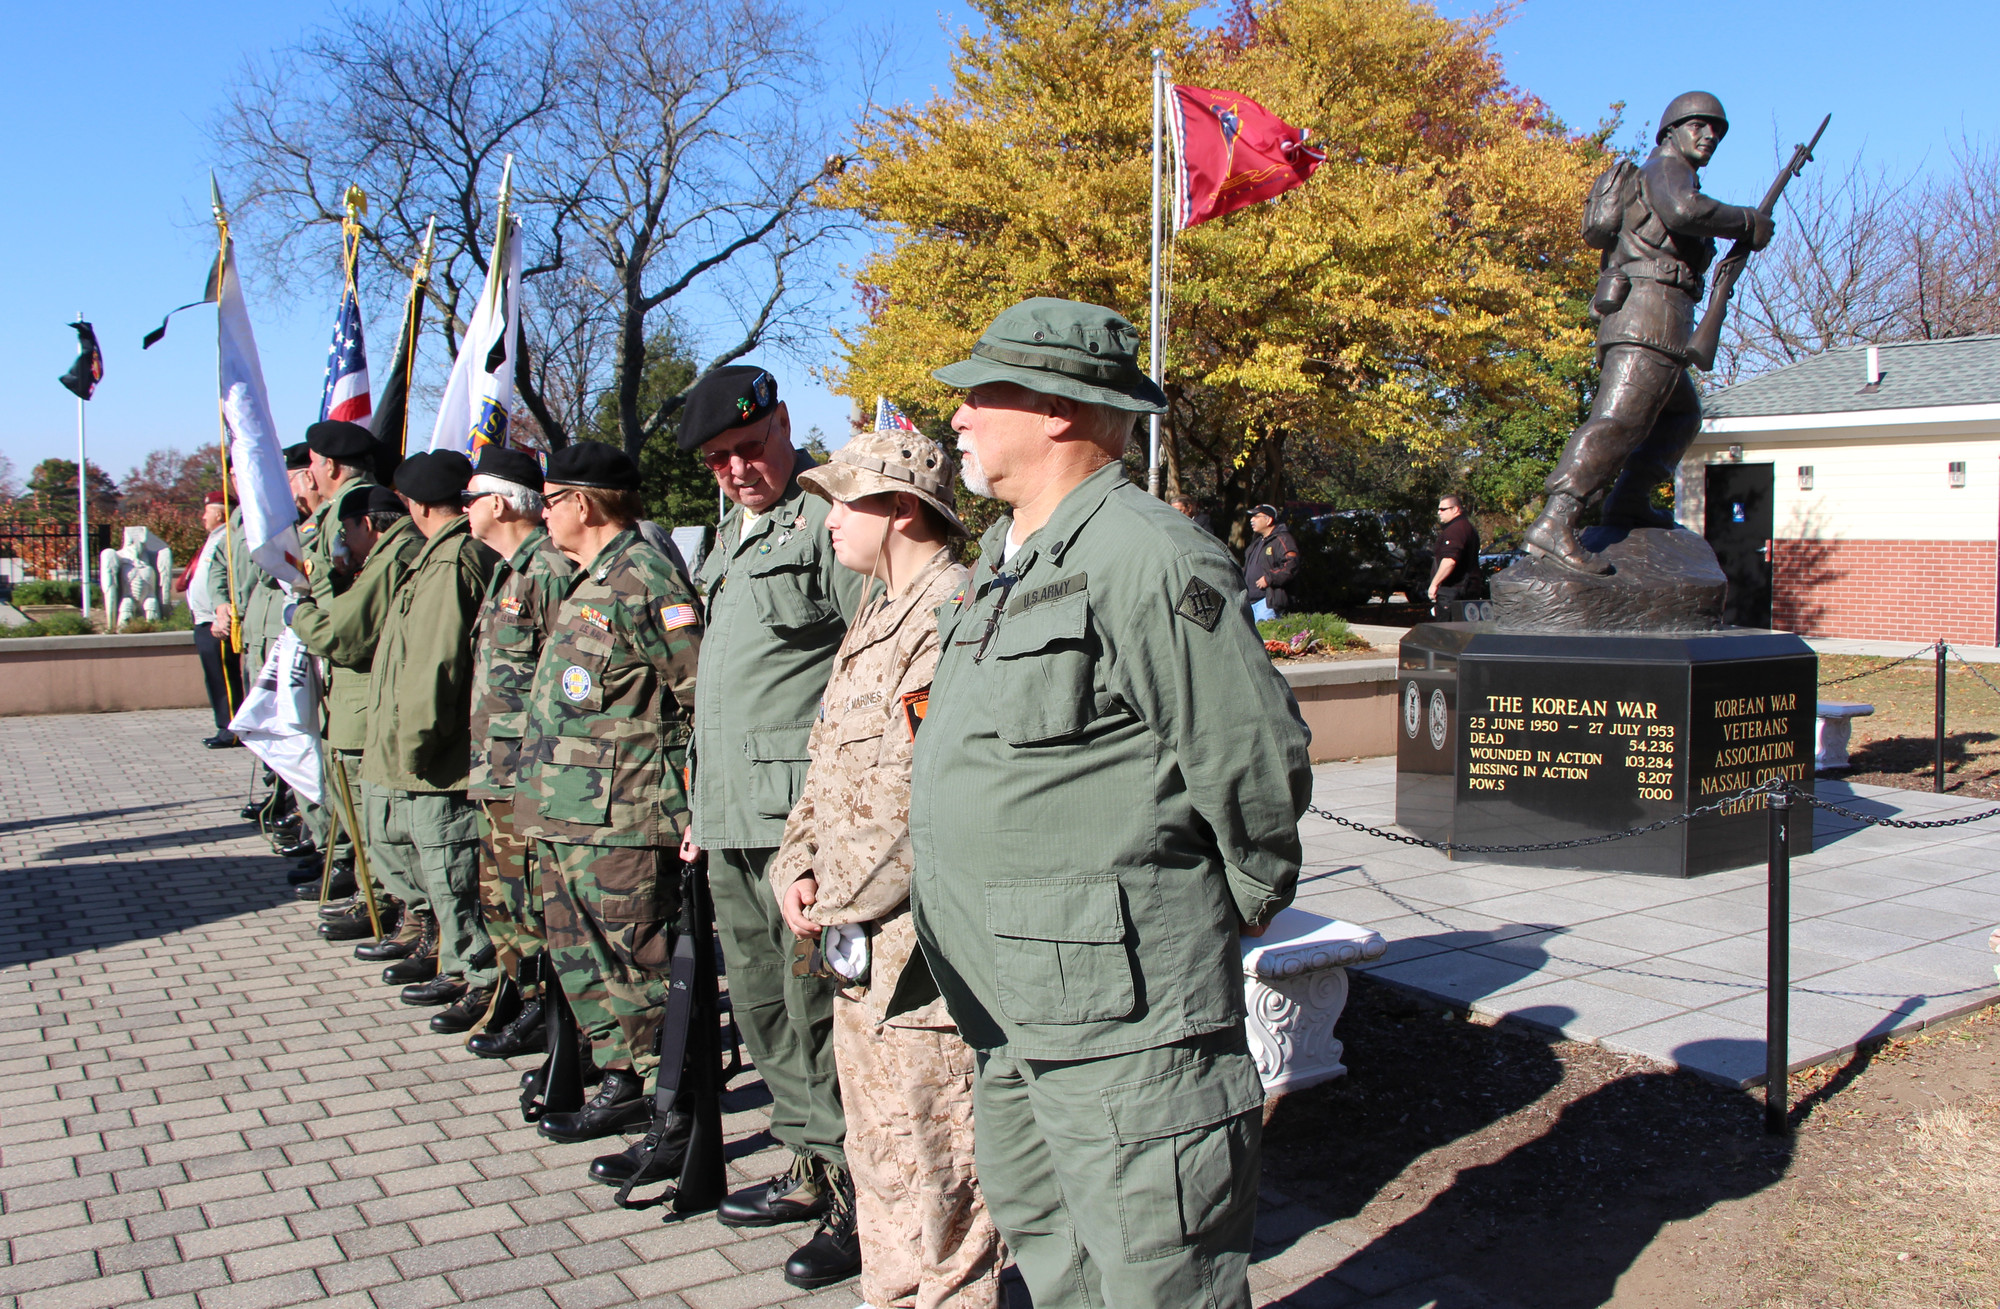 Vietnam Veterans were among the many who were honored.